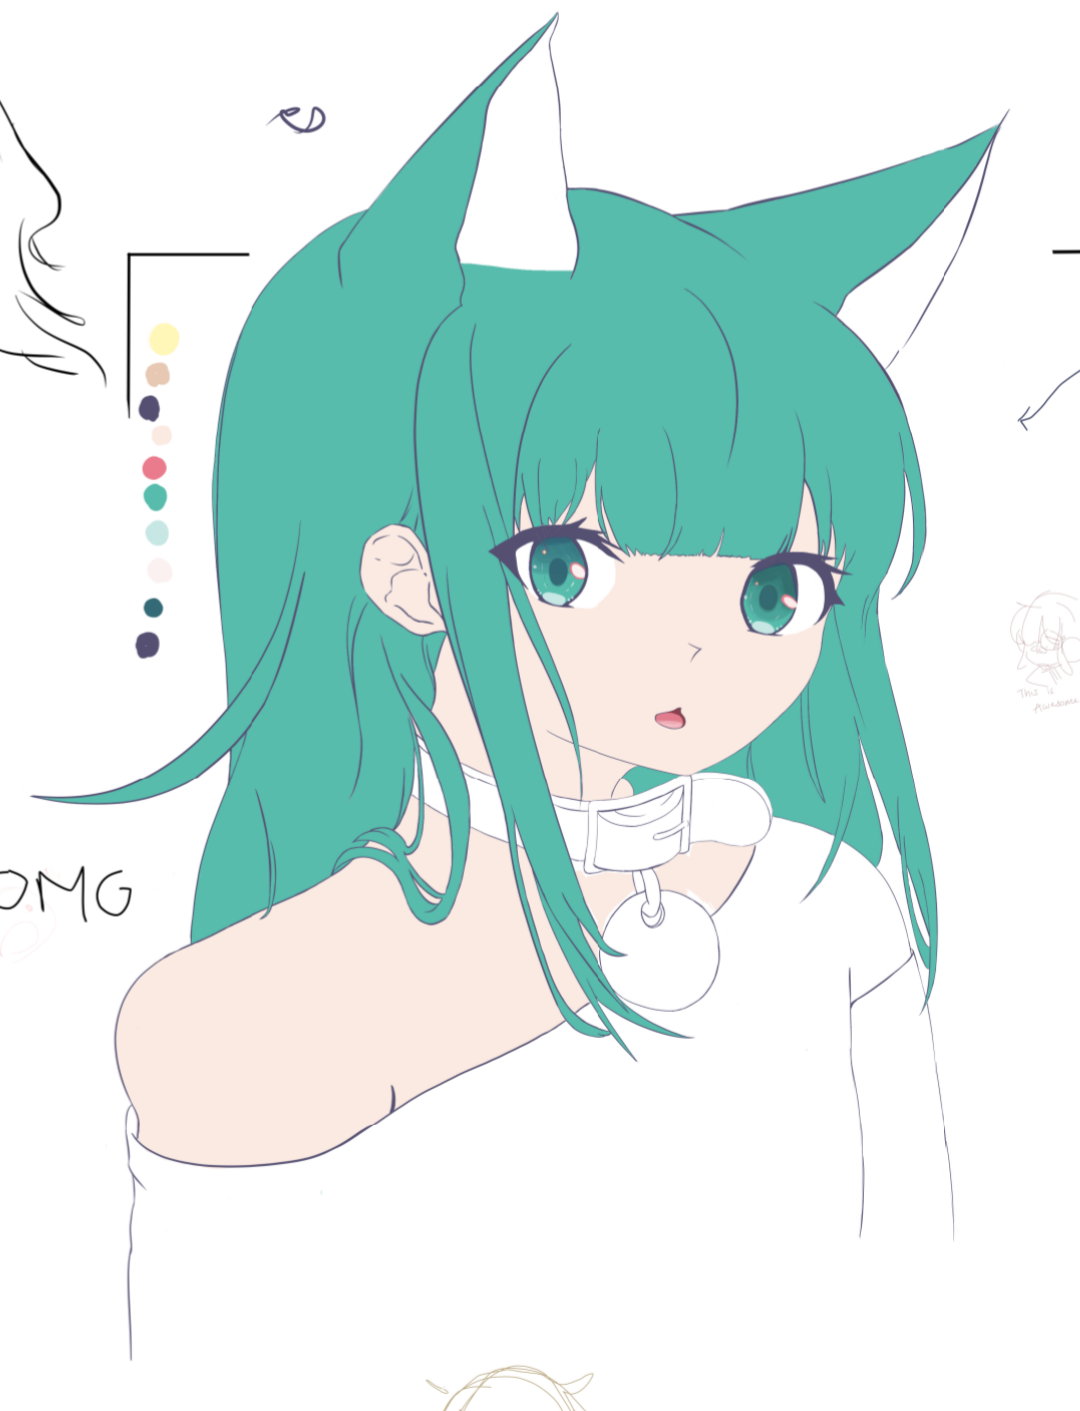 Teal hair 50% done, needs shading. Now about the shirt.. which color would u choose?